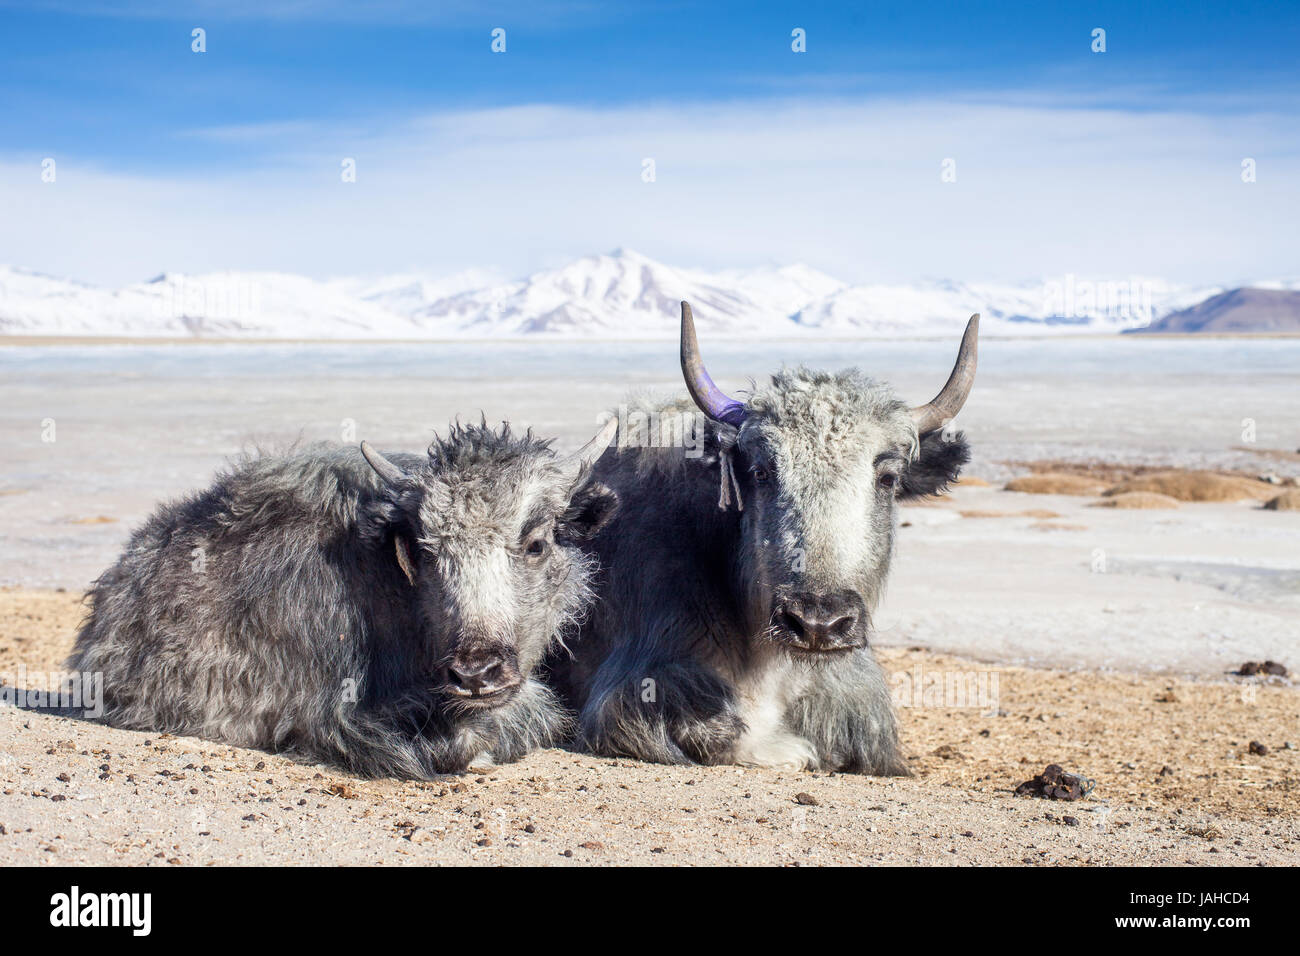 A mother Yak and grey calf relaxing by the shores of the frozen Startsapuk Tso lake in the Changthang region of Ladakh Stock Photo